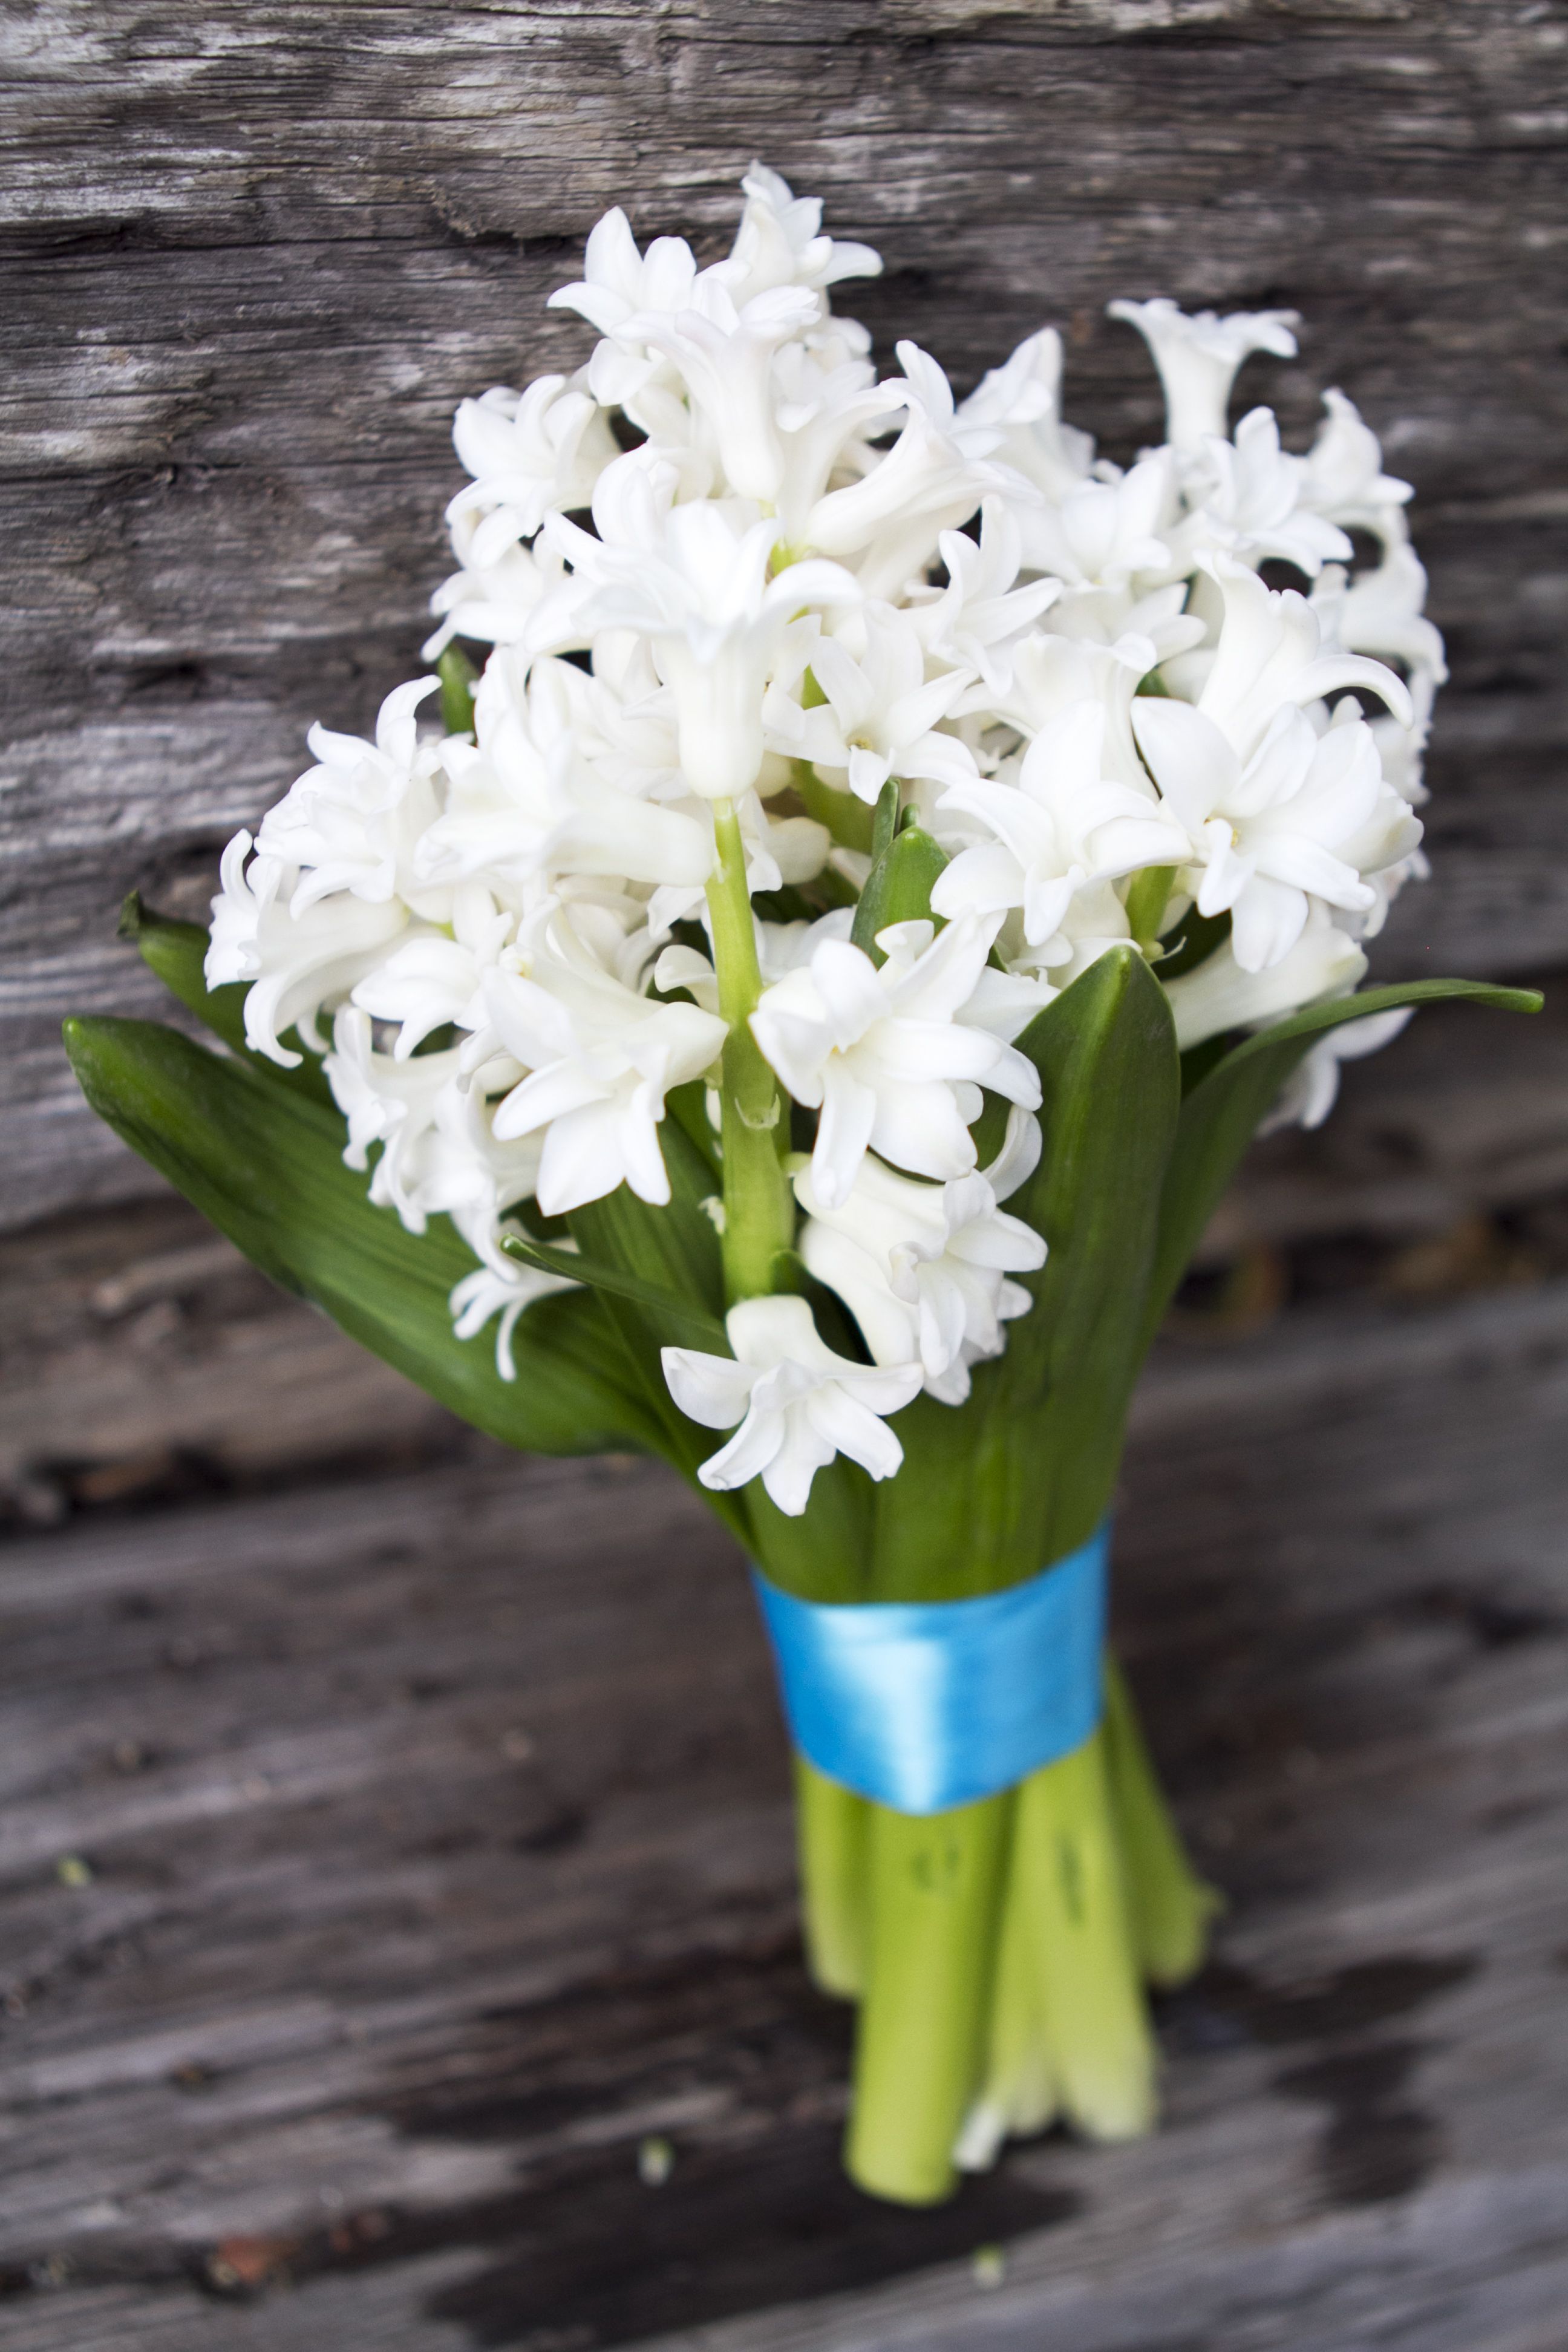 bouquet with white hyacinth and teal blue ribbon | Simply Bouquets ...